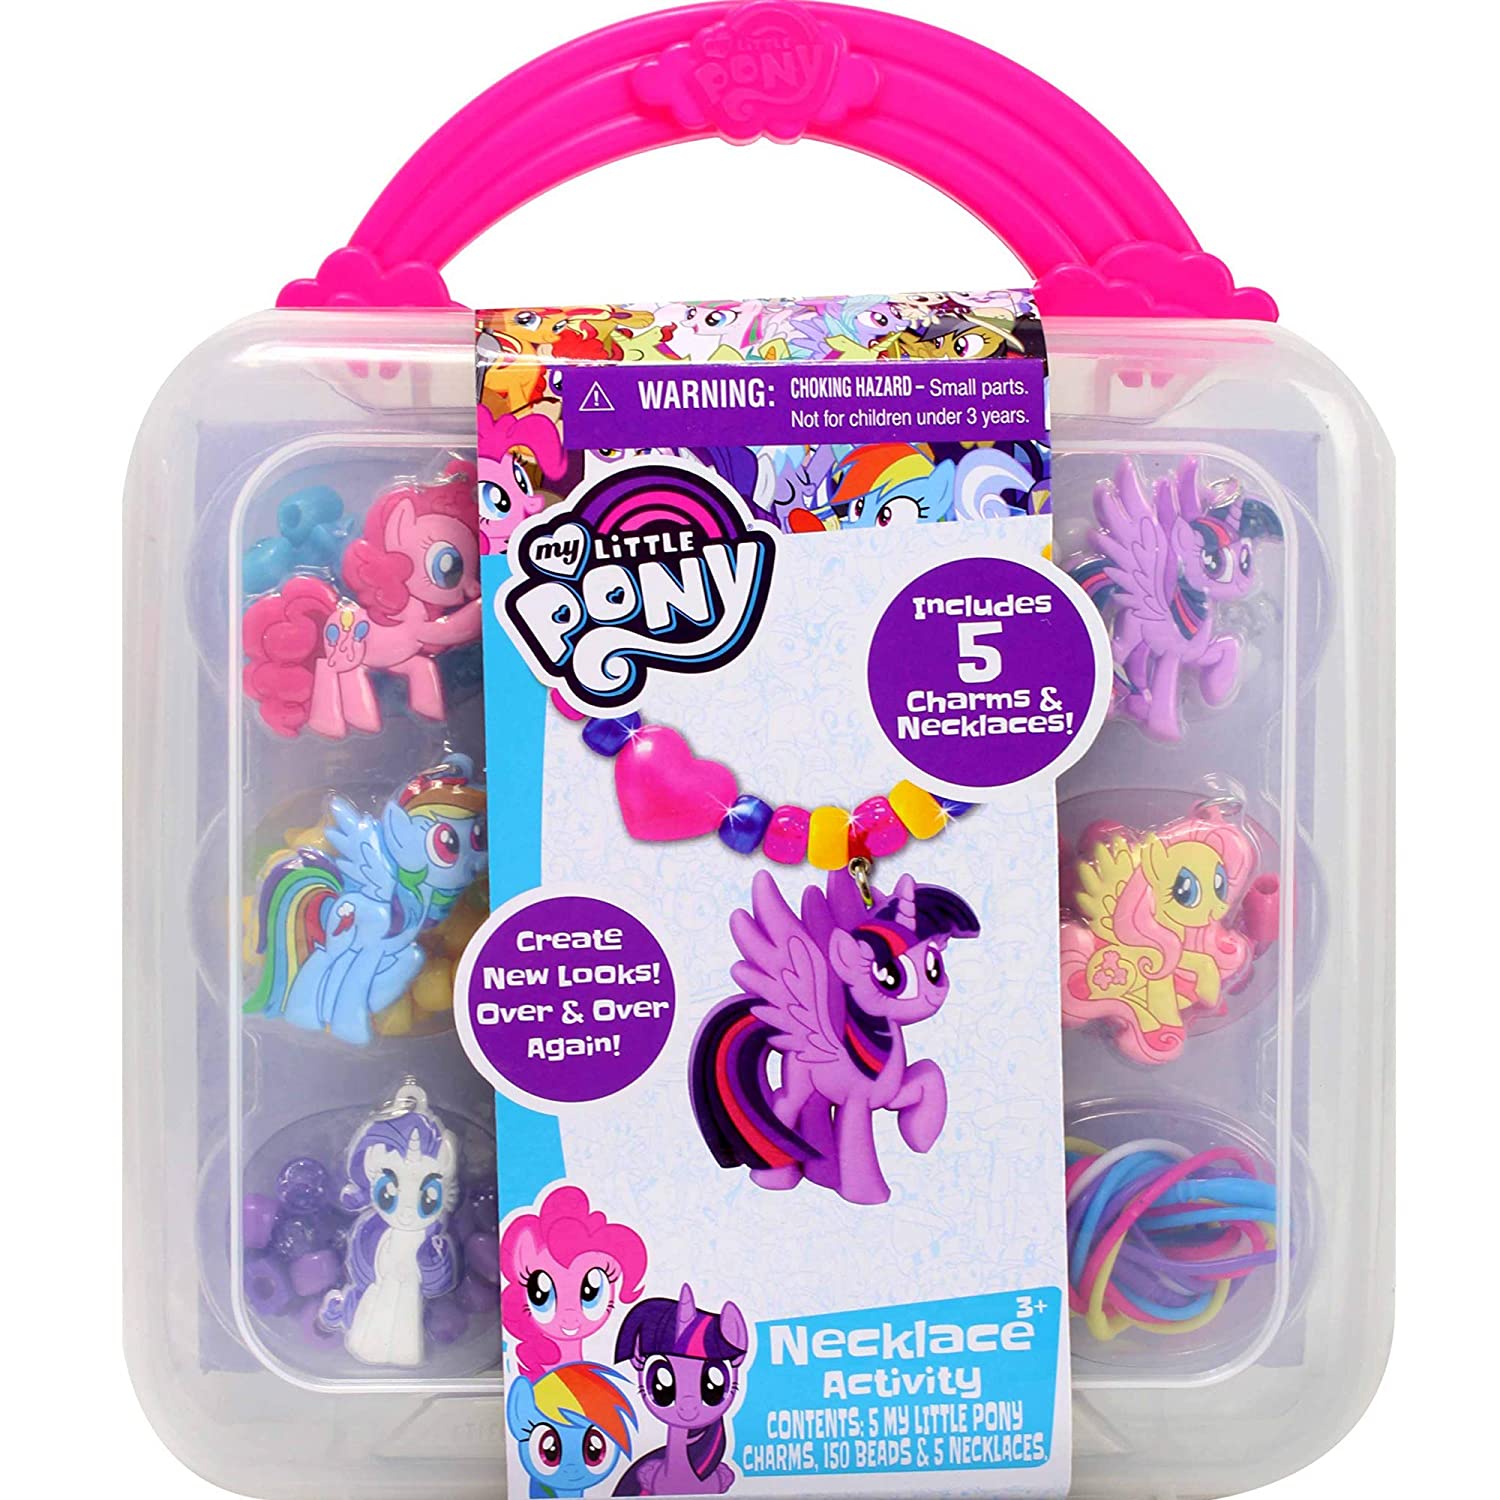 Top 11 Best My Little Pony Toys Reviews in 2023 4